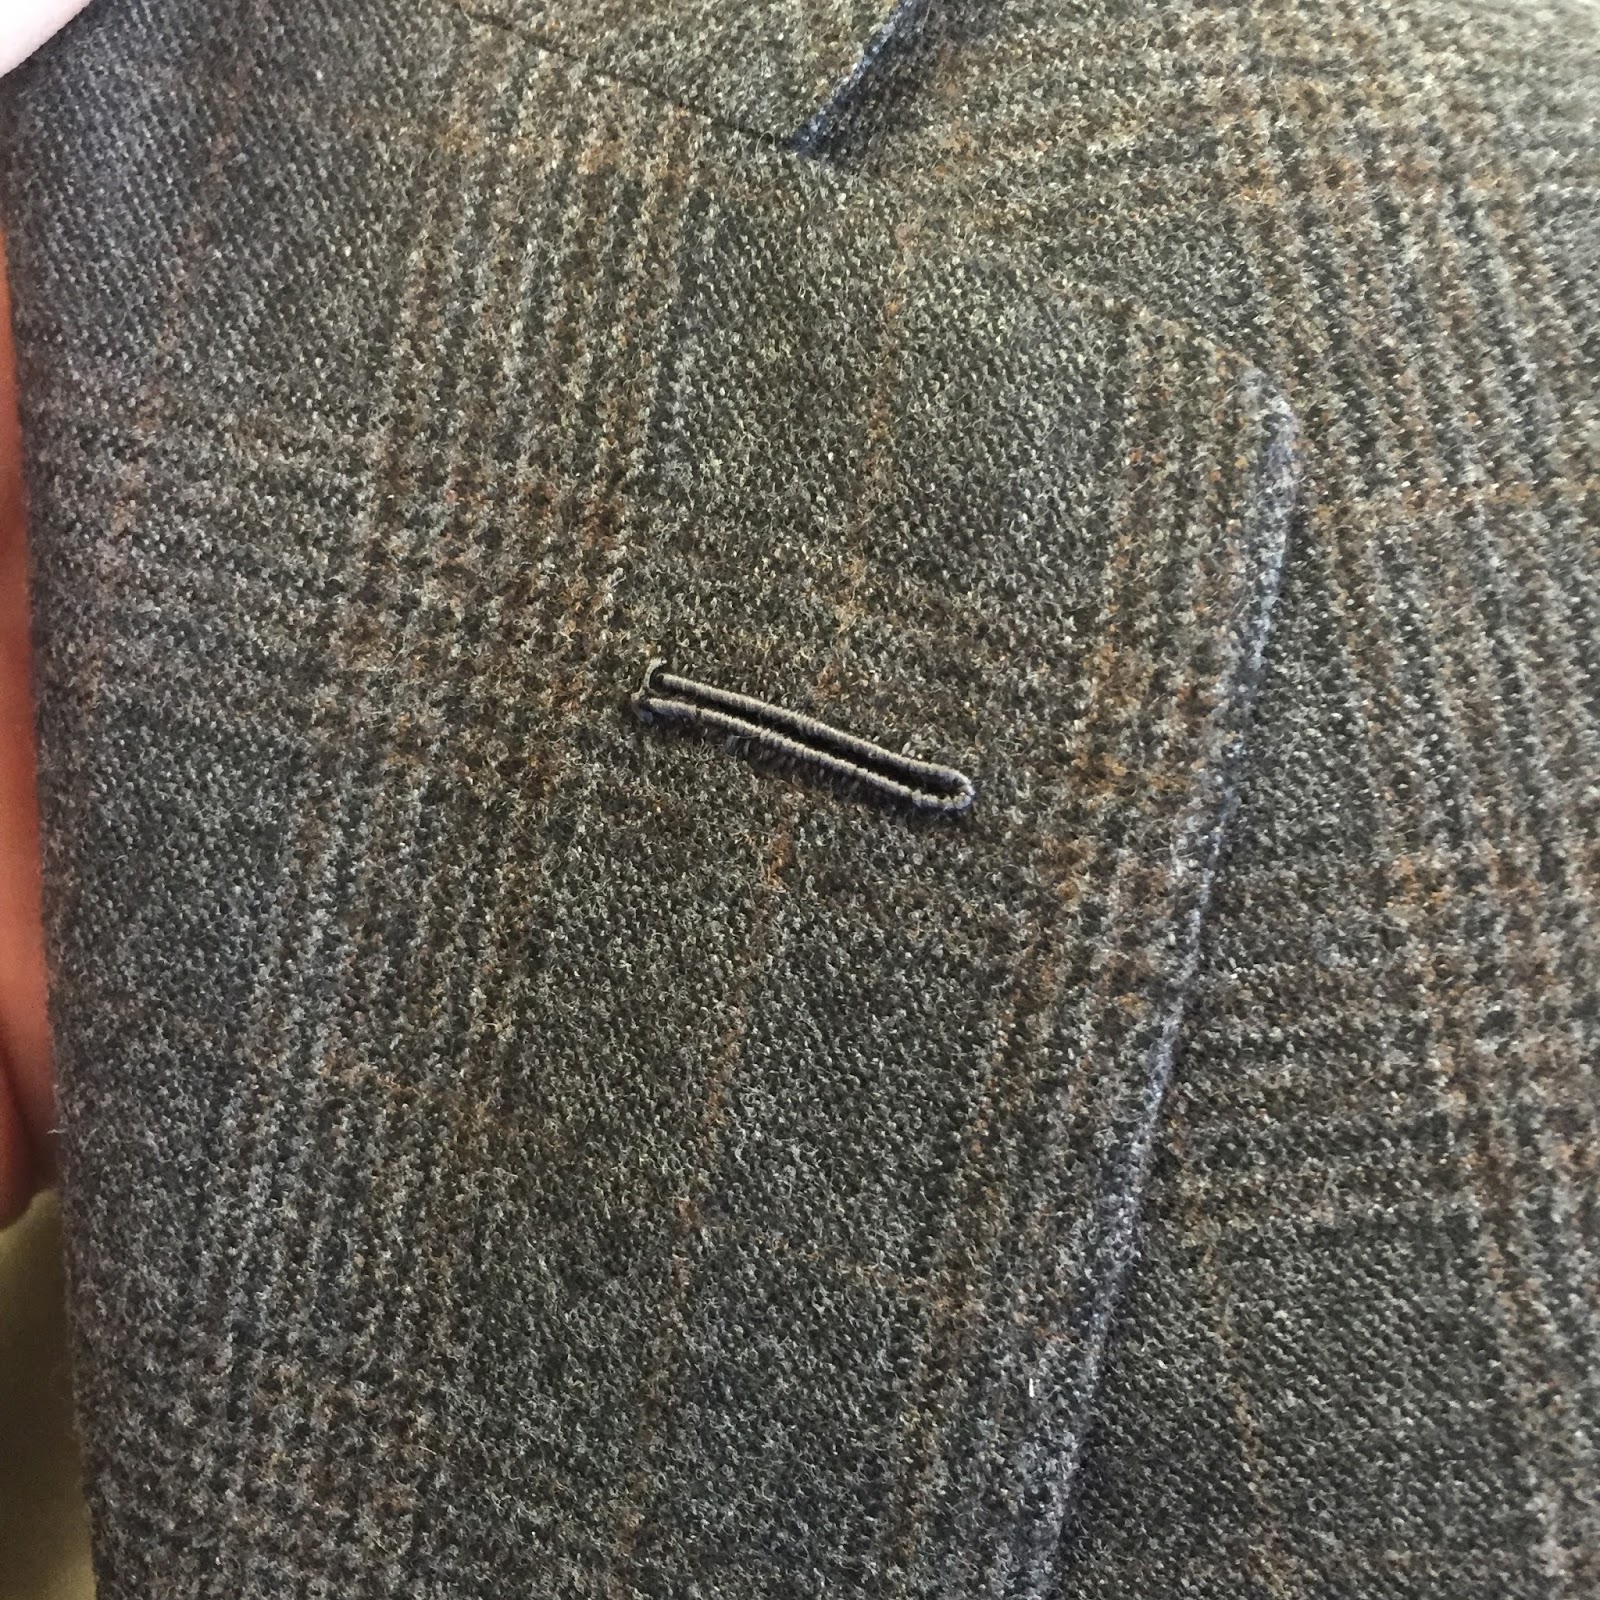 Made by Hand- the great Sartorial Debate: Finishing touches